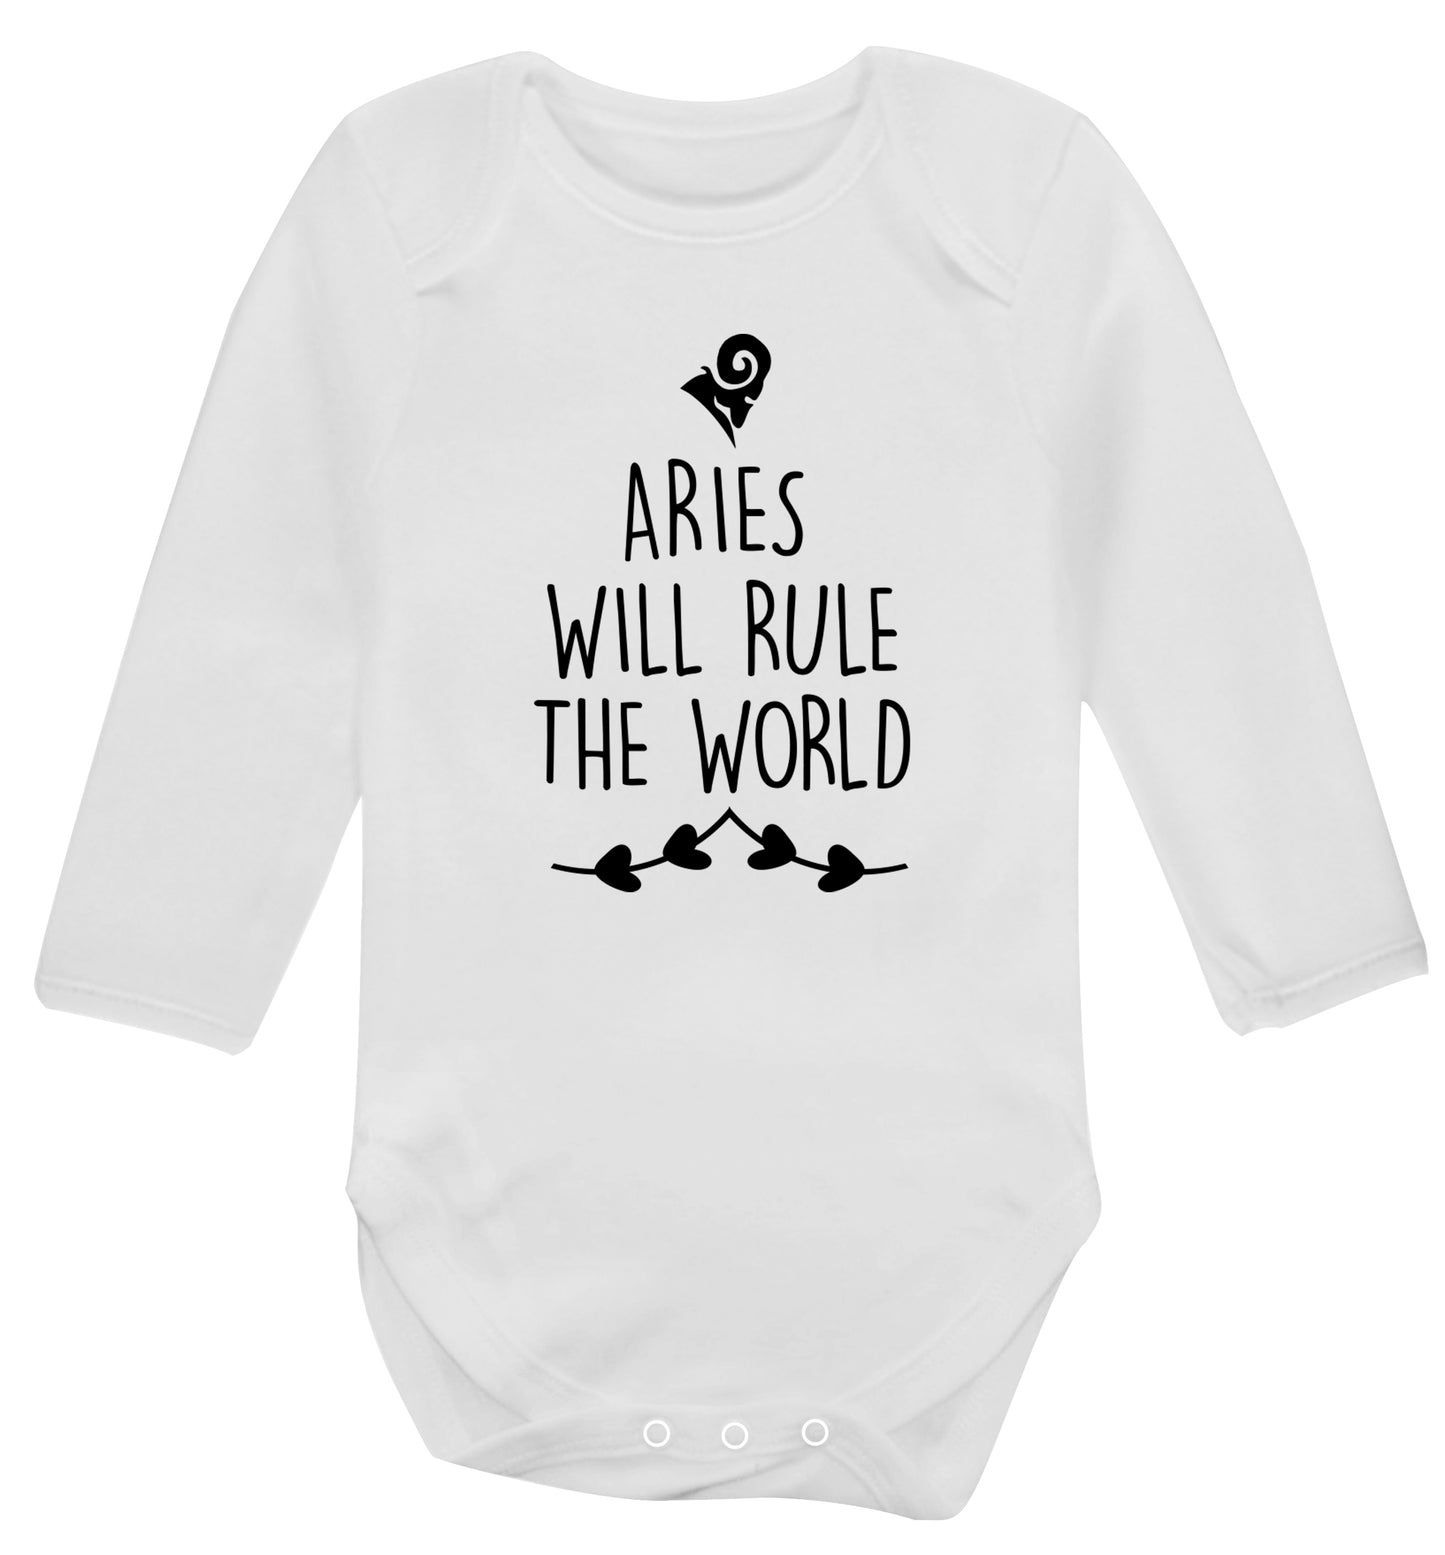 Aries will rule the world Baby Vest long sleeved white 6-12 months